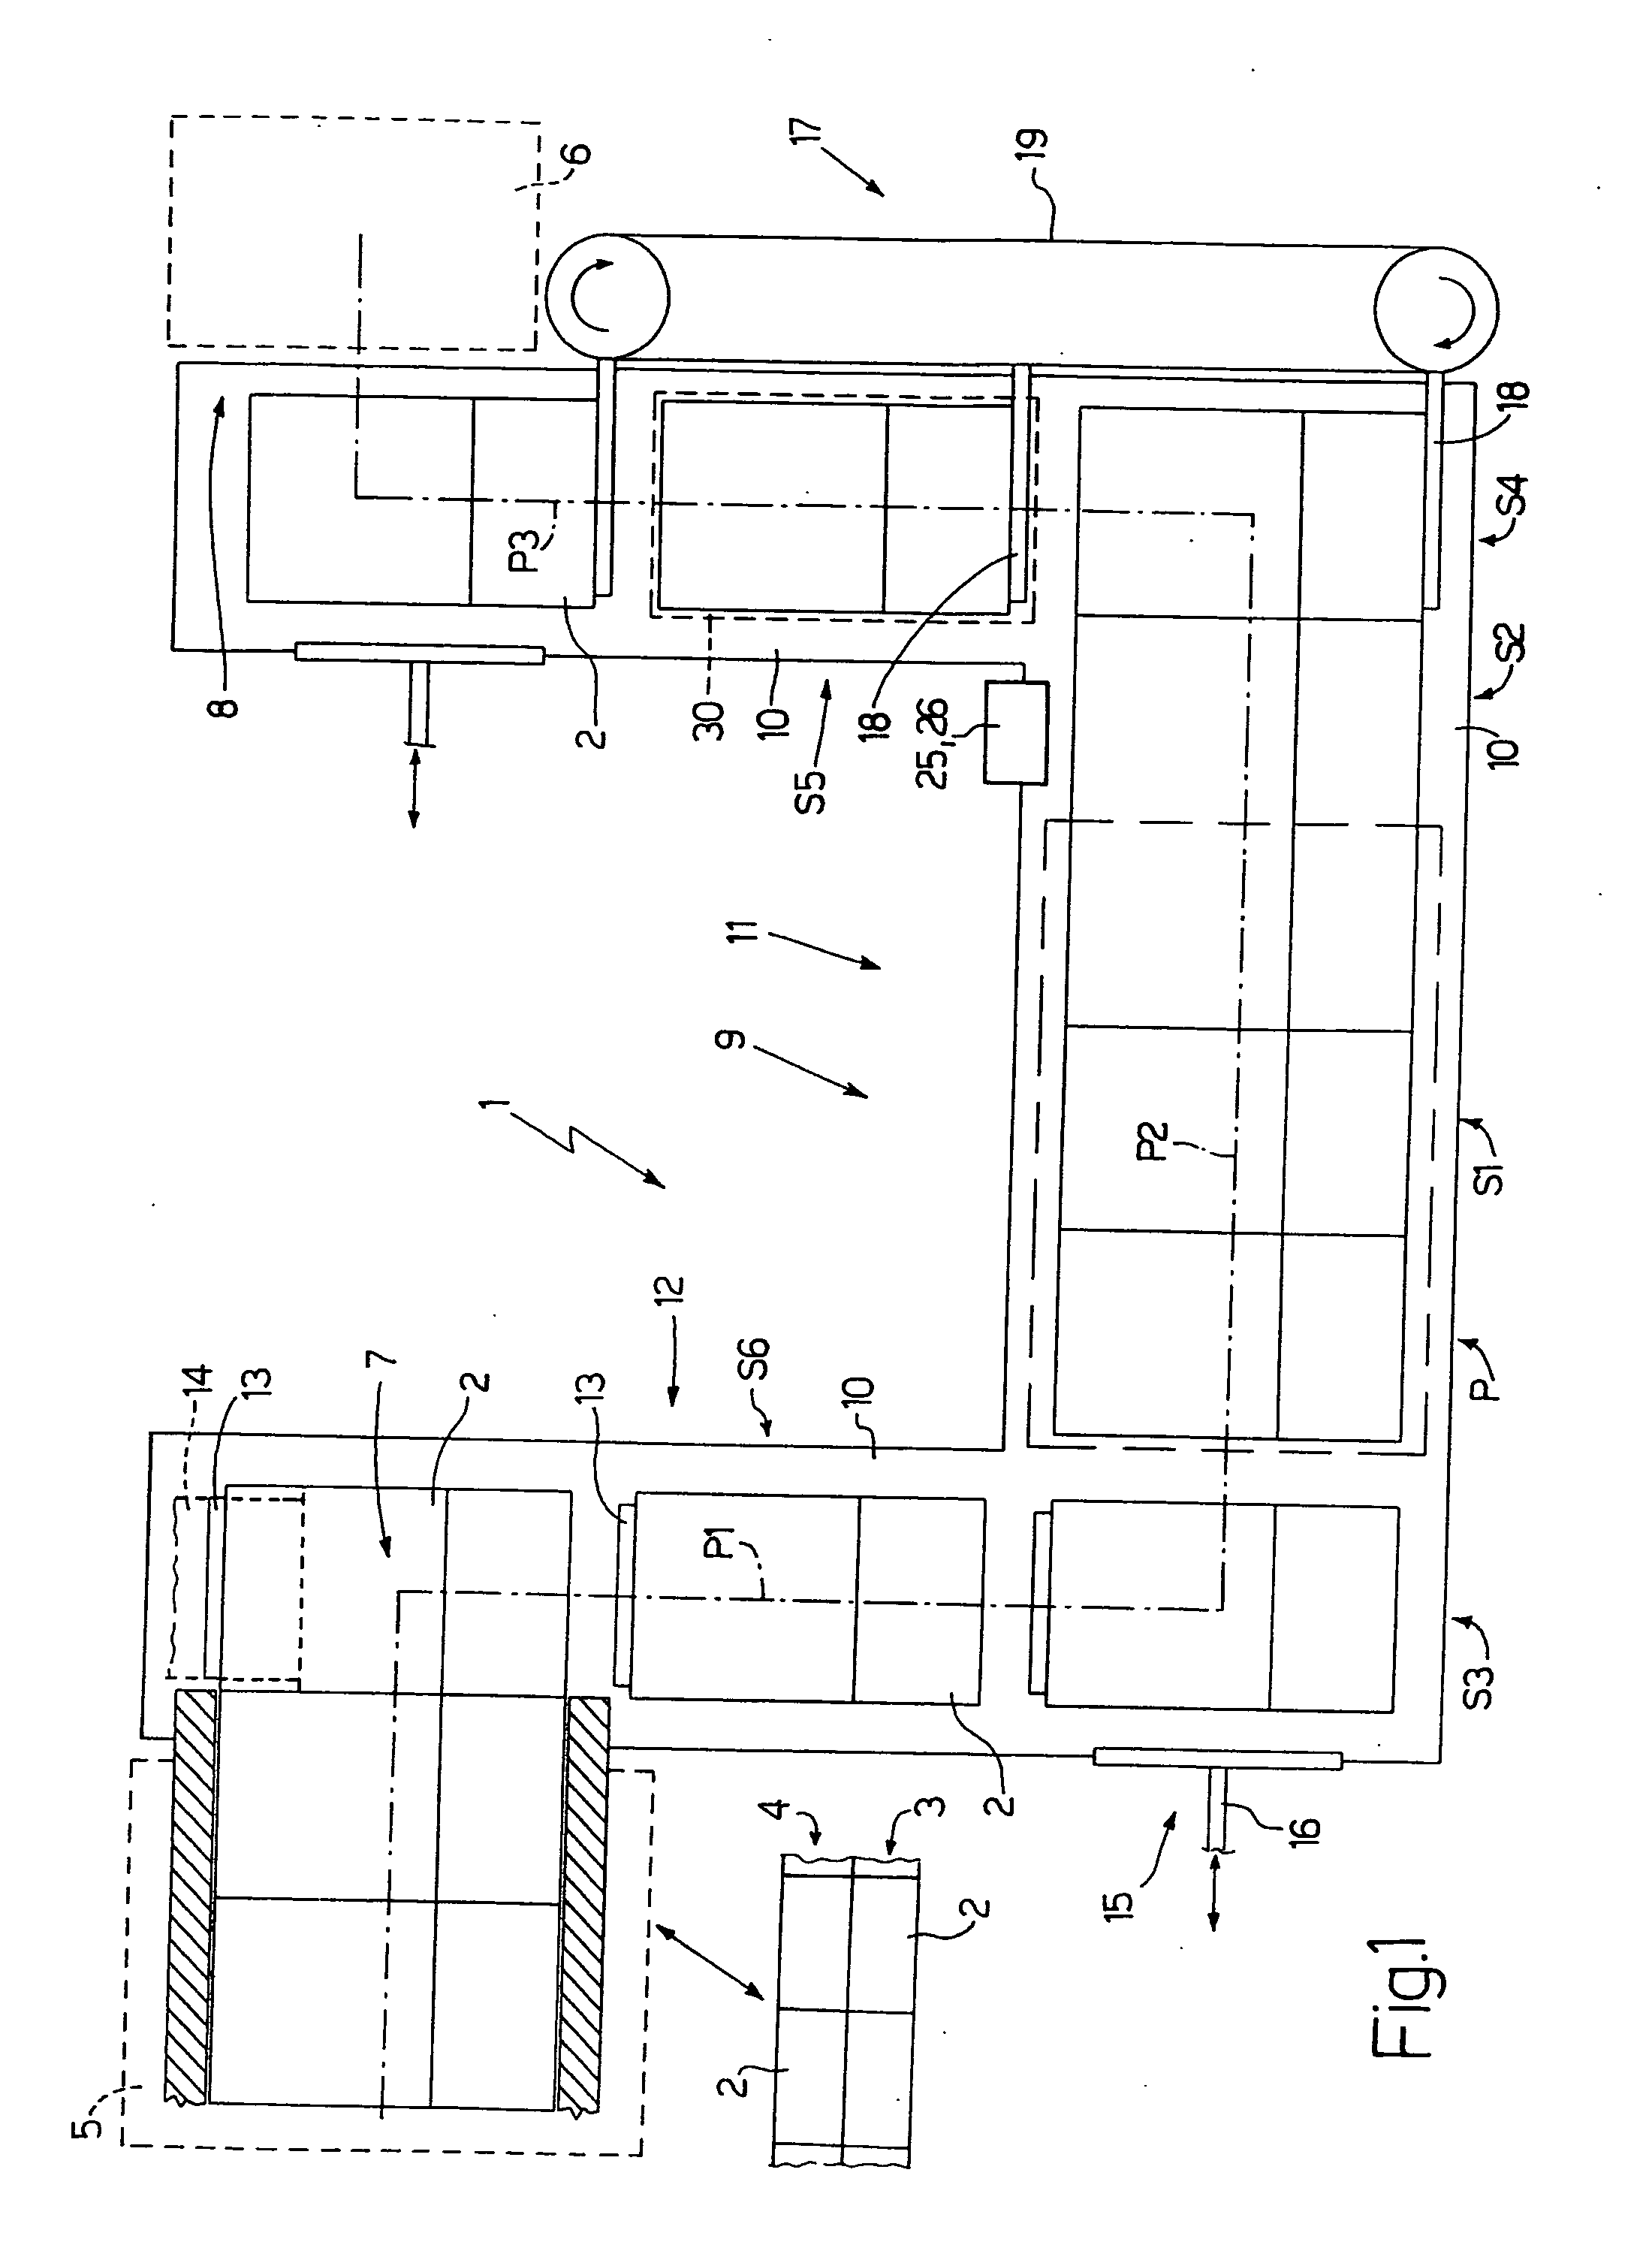 Unit and method of feeding containers arranged in a number of superimposed rows